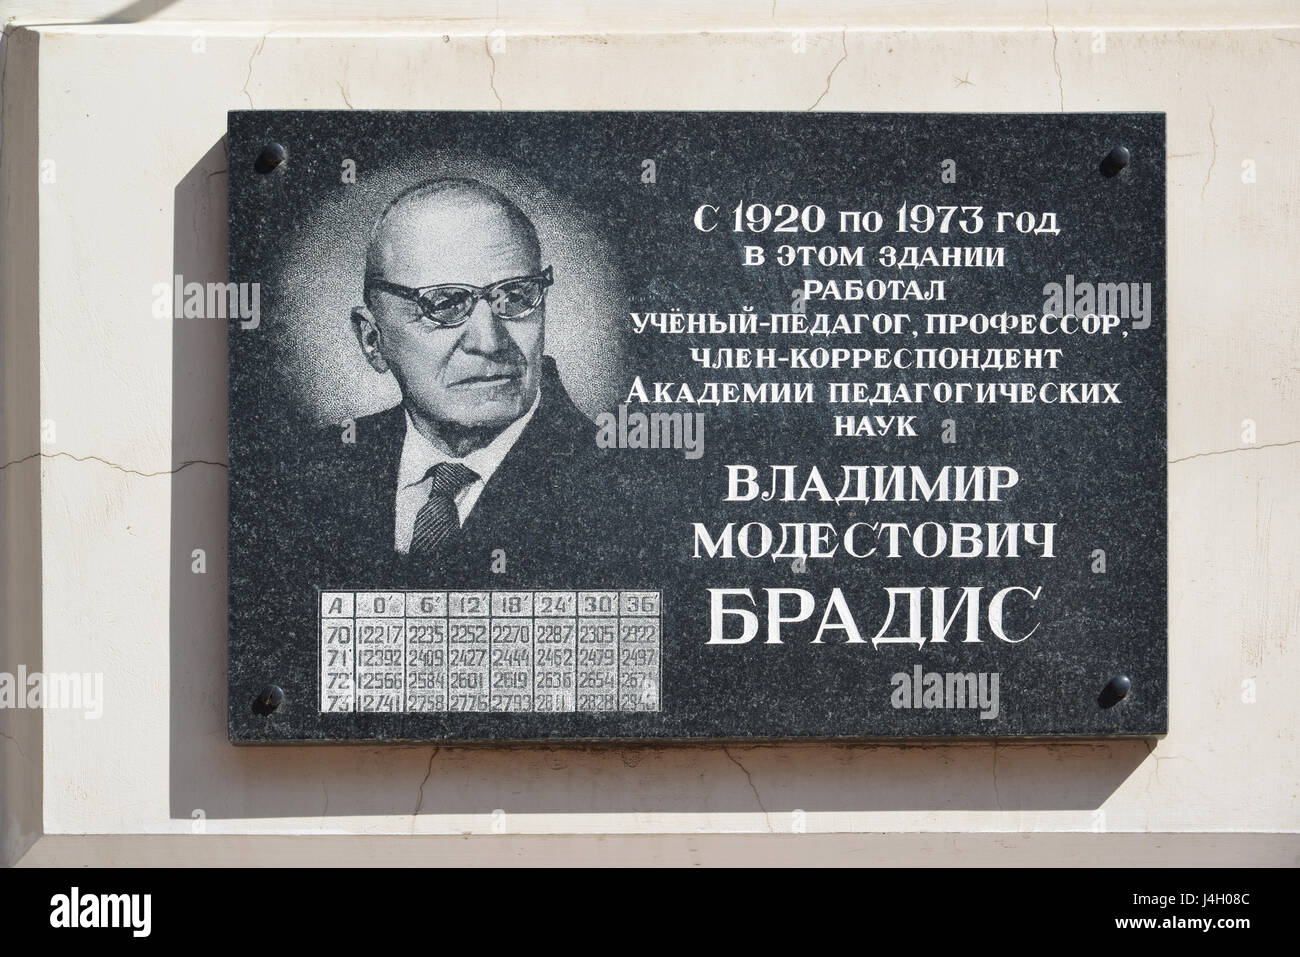 Tver, russia - may. 07.2017. Memorial plaque to the professor of pedagogical sciences Vladimir Bradis on the wall of the house Stock Photo